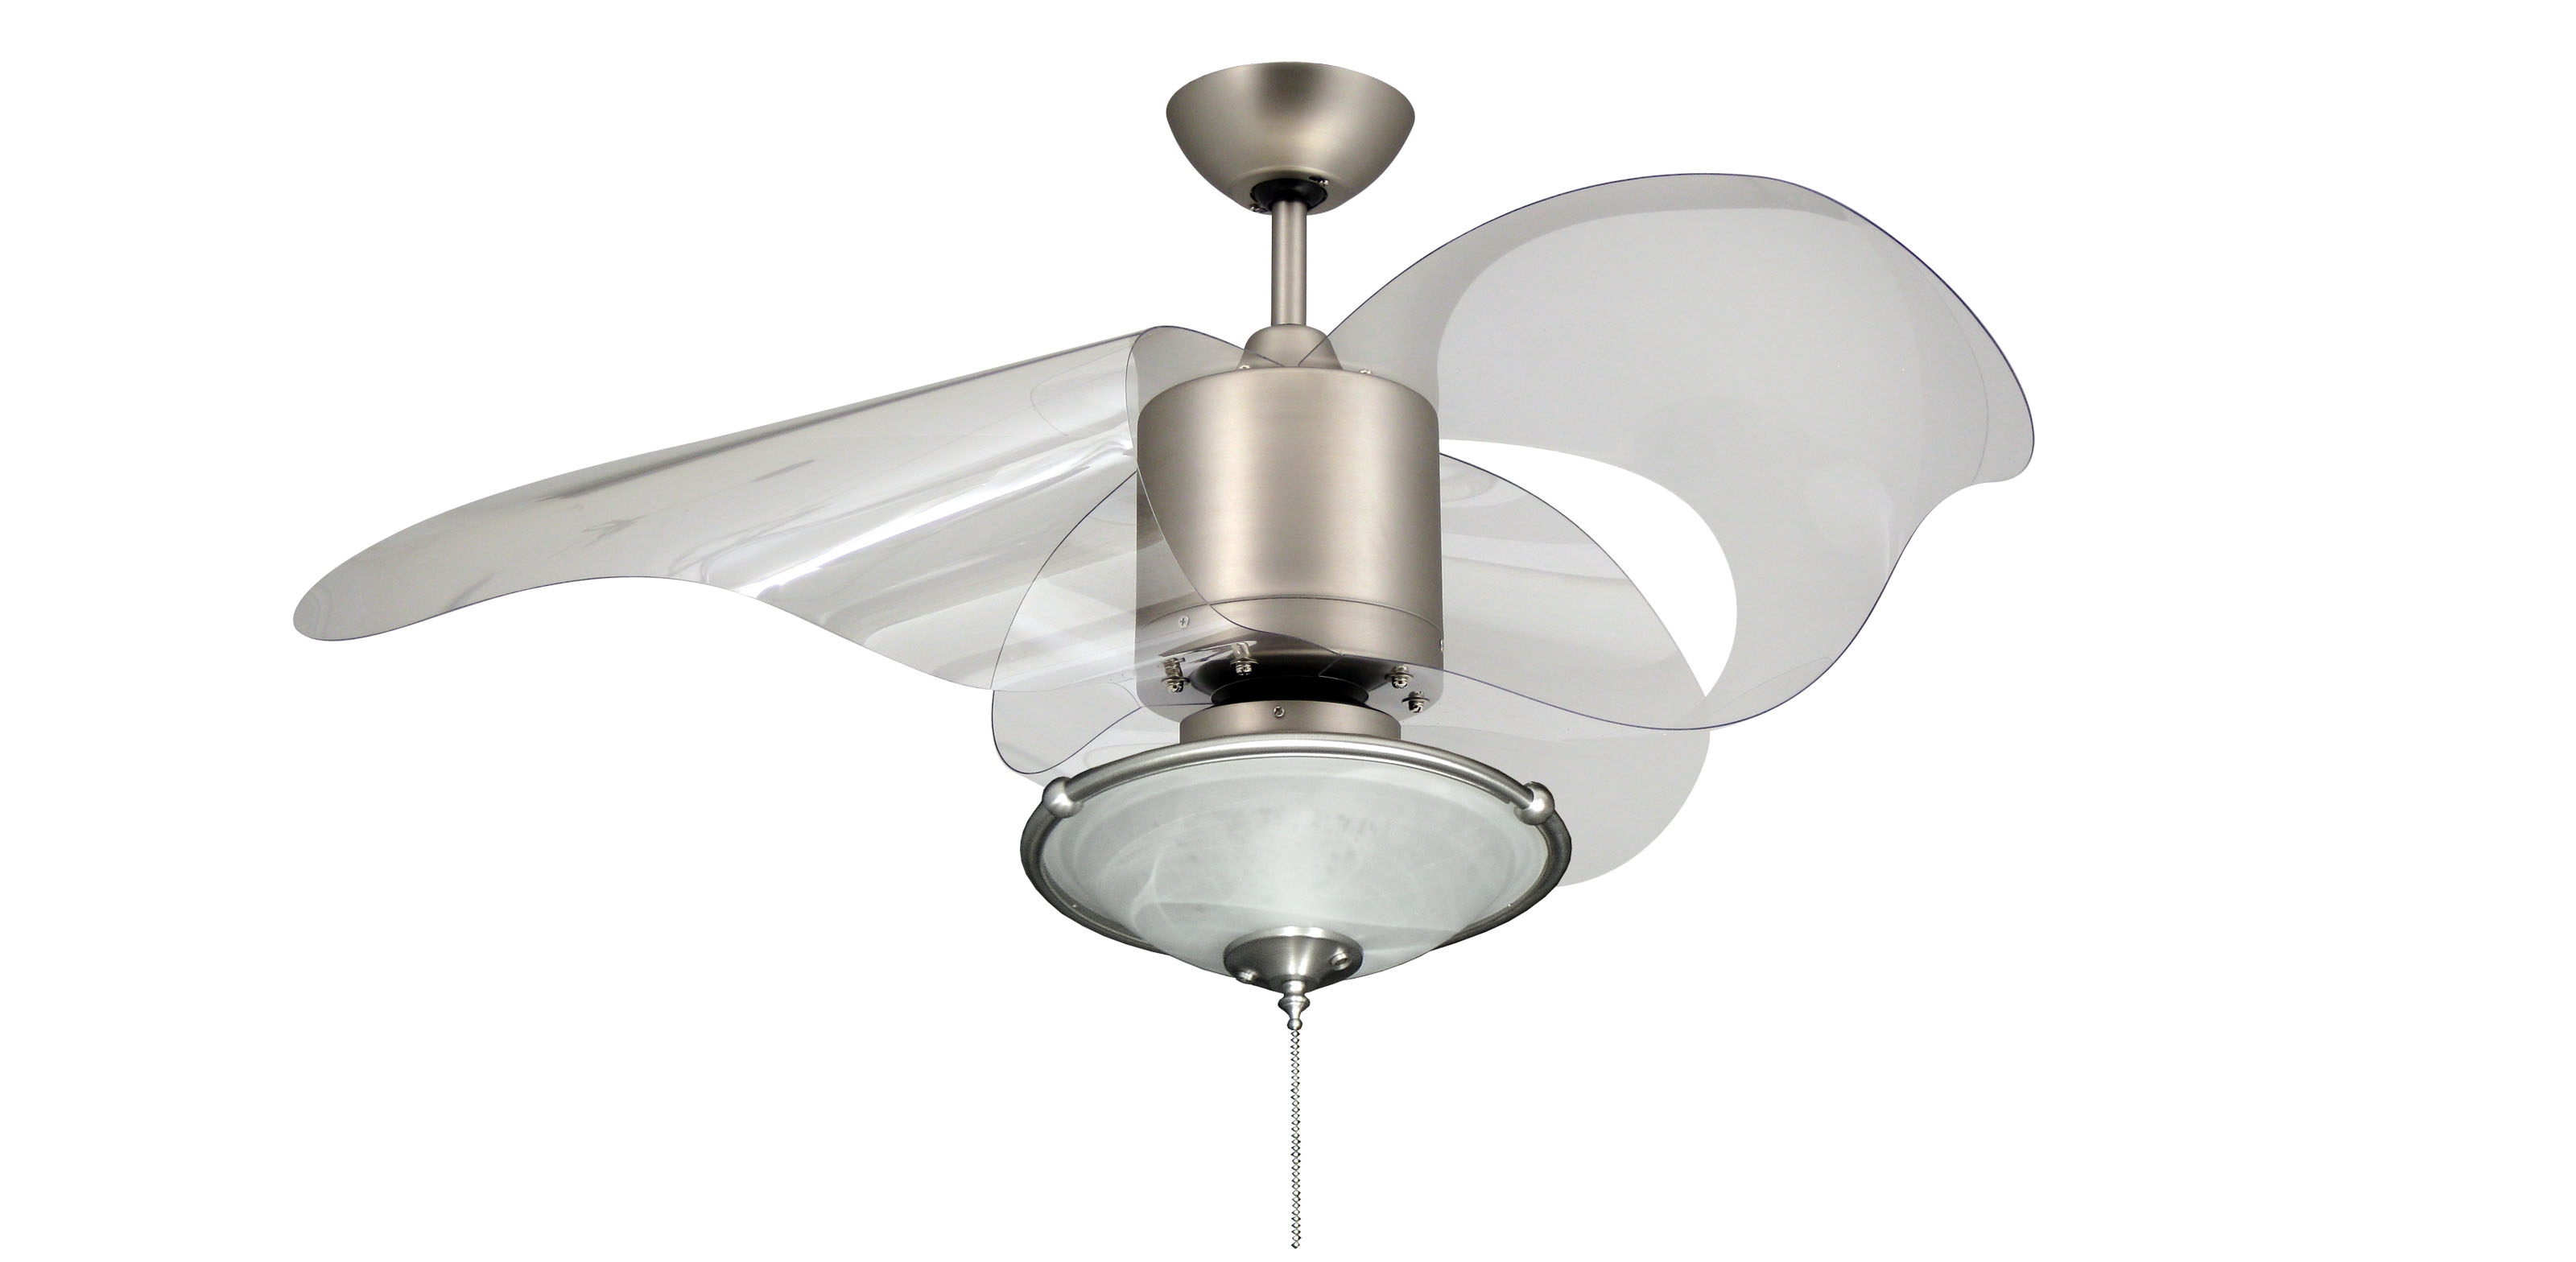 Unusual Ceiling Fan Light Kitceiling fashionable nautical ceiling fans to give your room a